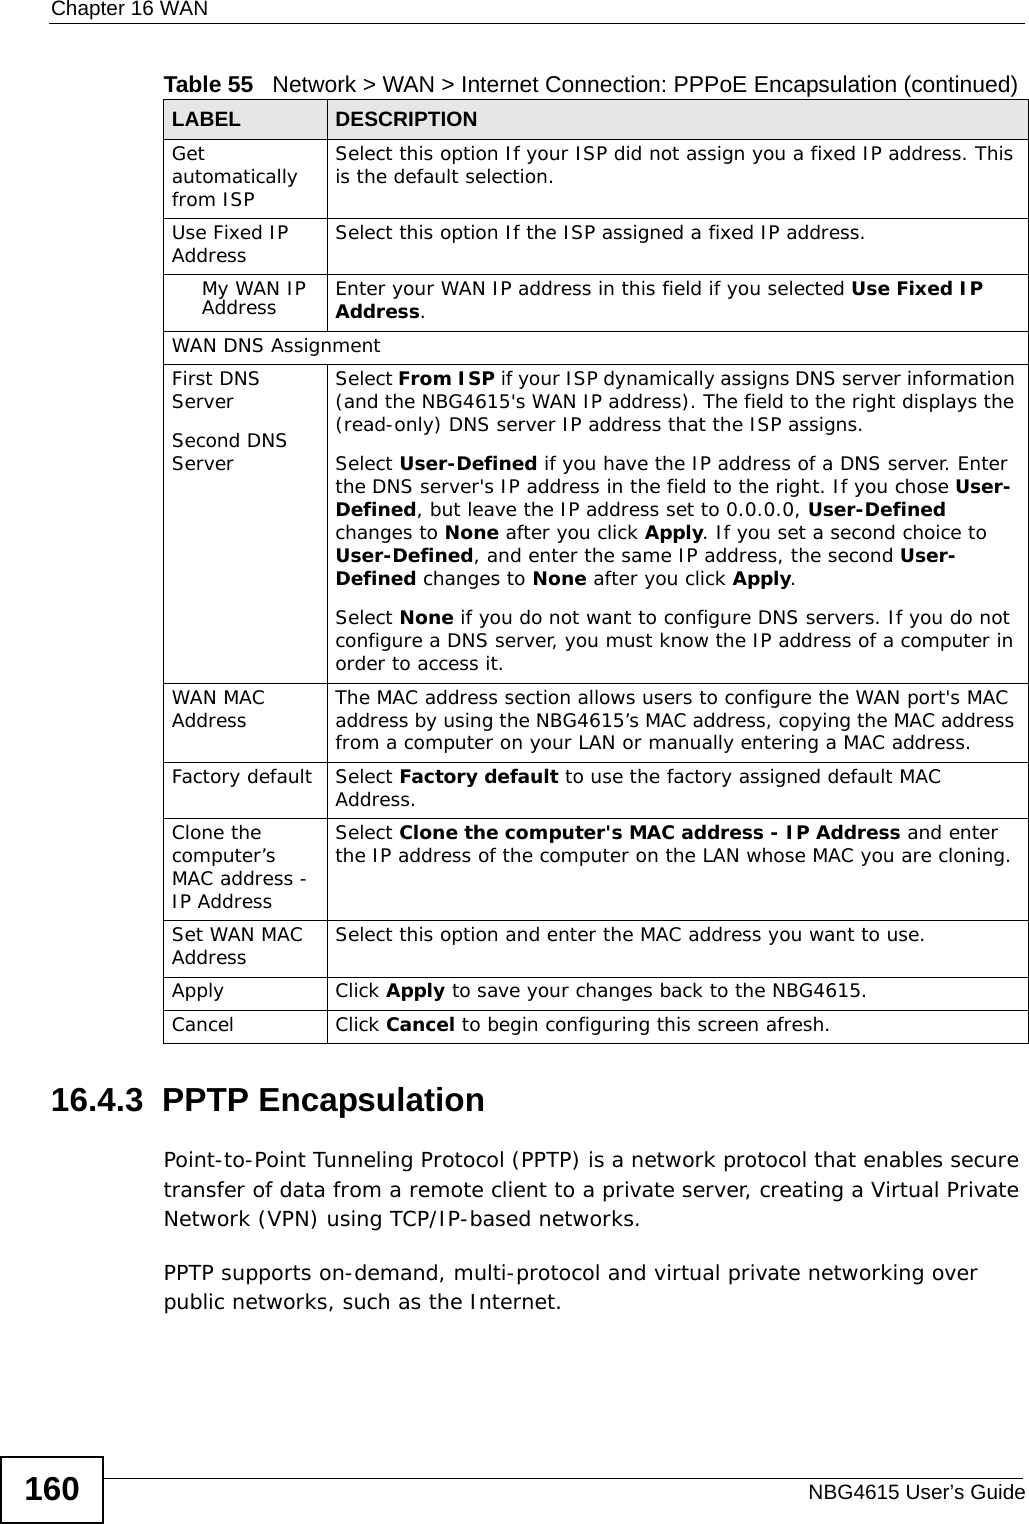 Chapter 16 WANNBG4615 User’s Guide16016.4.3  PPTP EncapsulationPoint-to-Point Tunneling Protocol (PPTP) is a network protocol that enables secure transfer of data from a remote client to a private server, creating a Virtual Private Network (VPN) using TCP/IP-based networks.PPTP supports on-demand, multi-protocol and virtual private networking over public networks, such as the Internet.Get automatically from ISP Select this option If your ISP did not assign you a fixed IP address. This is the default selection. Use Fixed IP Address Select this option If the ISP assigned a fixed IP address. My WAN IP Address Enter your WAN IP address in this field if you selected Use Fixed IP Address. WAN DNS AssignmentFirst DNS ServerSecond DNS Server Select From ISP if your ISP dynamically assigns DNS server information (and the NBG4615&apos;s WAN IP address). The field to the right displays the (read-only) DNS server IP address that the ISP assigns. Select User-Defined if you have the IP address of a DNS server. Enter the DNS server&apos;s IP address in the field to the right. If you chose User-Defined, but leave the IP address set to 0.0.0.0, User-Defined changes to None after you click Apply. If you set a second choice to User-Defined, and enter the same IP address, the second User-Defined changes to None after you click Apply. Select None if you do not want to configure DNS servers. If you do not configure a DNS server, you must know the IP address of a computer in order to access it.WAN MAC Address The MAC address section allows users to configure the WAN port&apos;s MAC address by using the NBG4615’s MAC address, copying the MAC address from a computer on your LAN or manually entering a MAC address. Factory default Select Factory default to use the factory assigned default MAC Address.Clone the computer’s MAC address - IP AddressSelect Clone the computer&apos;s MAC address - IP Address and enter the IP address of the computer on the LAN whose MAC you are cloning.Set WAN MAC Address Select this option and enter the MAC address you want to use.Apply Click Apply to save your changes back to the NBG4615.Cancel Click Cancel to begin configuring this screen afresh.Table 55   Network &gt; WAN &gt; Internet Connection: PPPoE Encapsulation (continued)LABEL DESCRIPTION